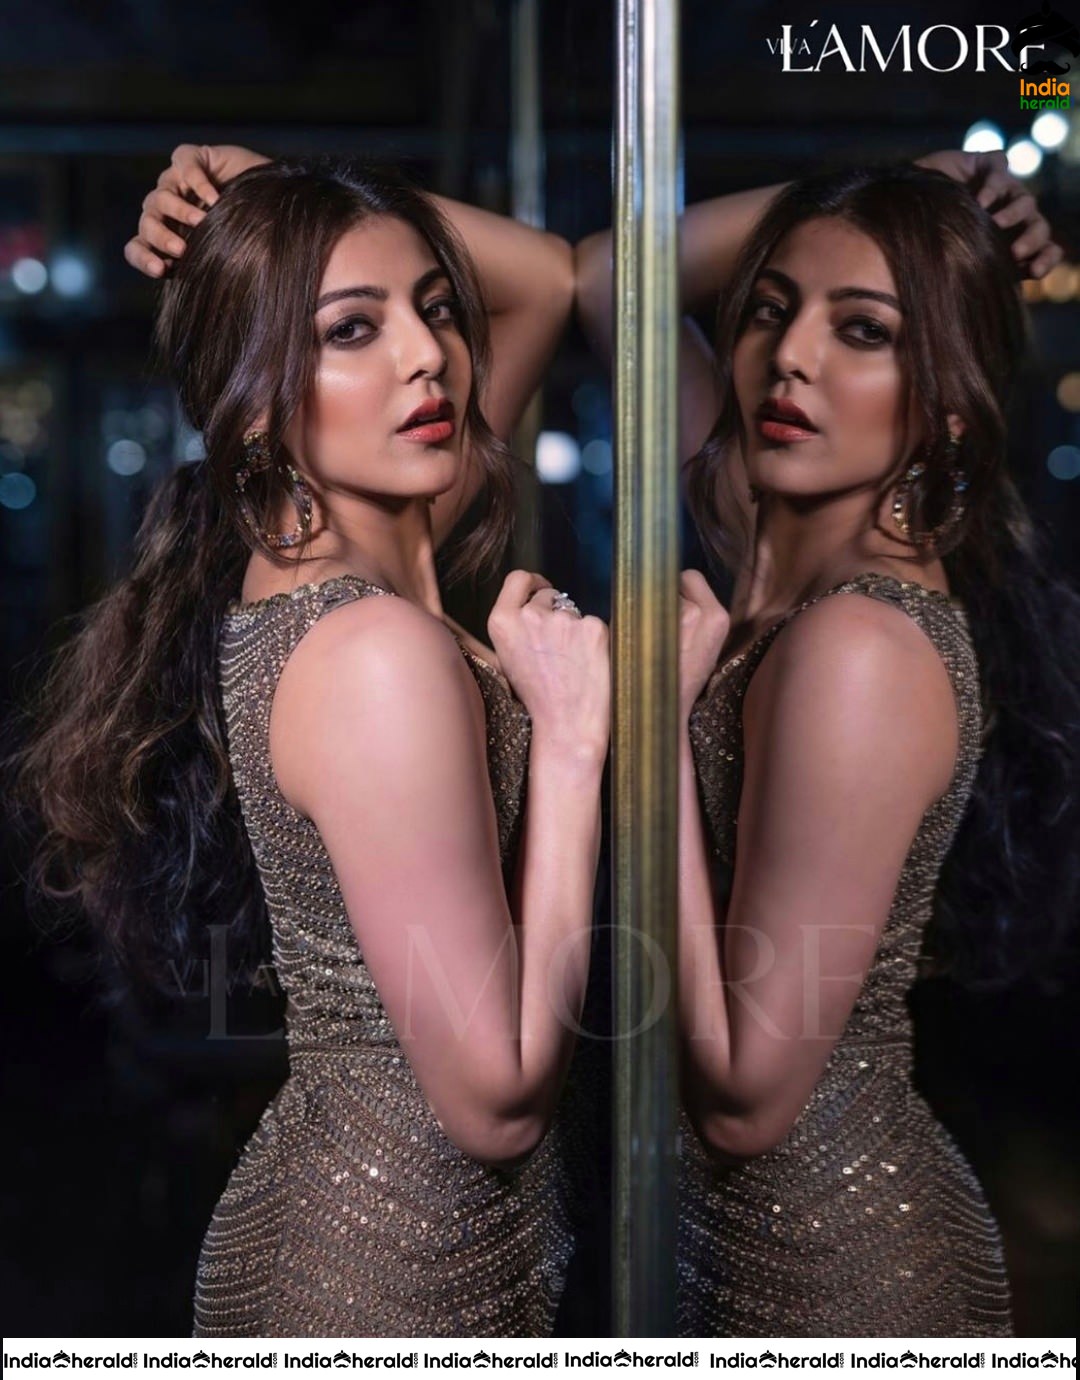 More Unseen Hot Photos Of Kajal Aggarwal From LaMore Magazine